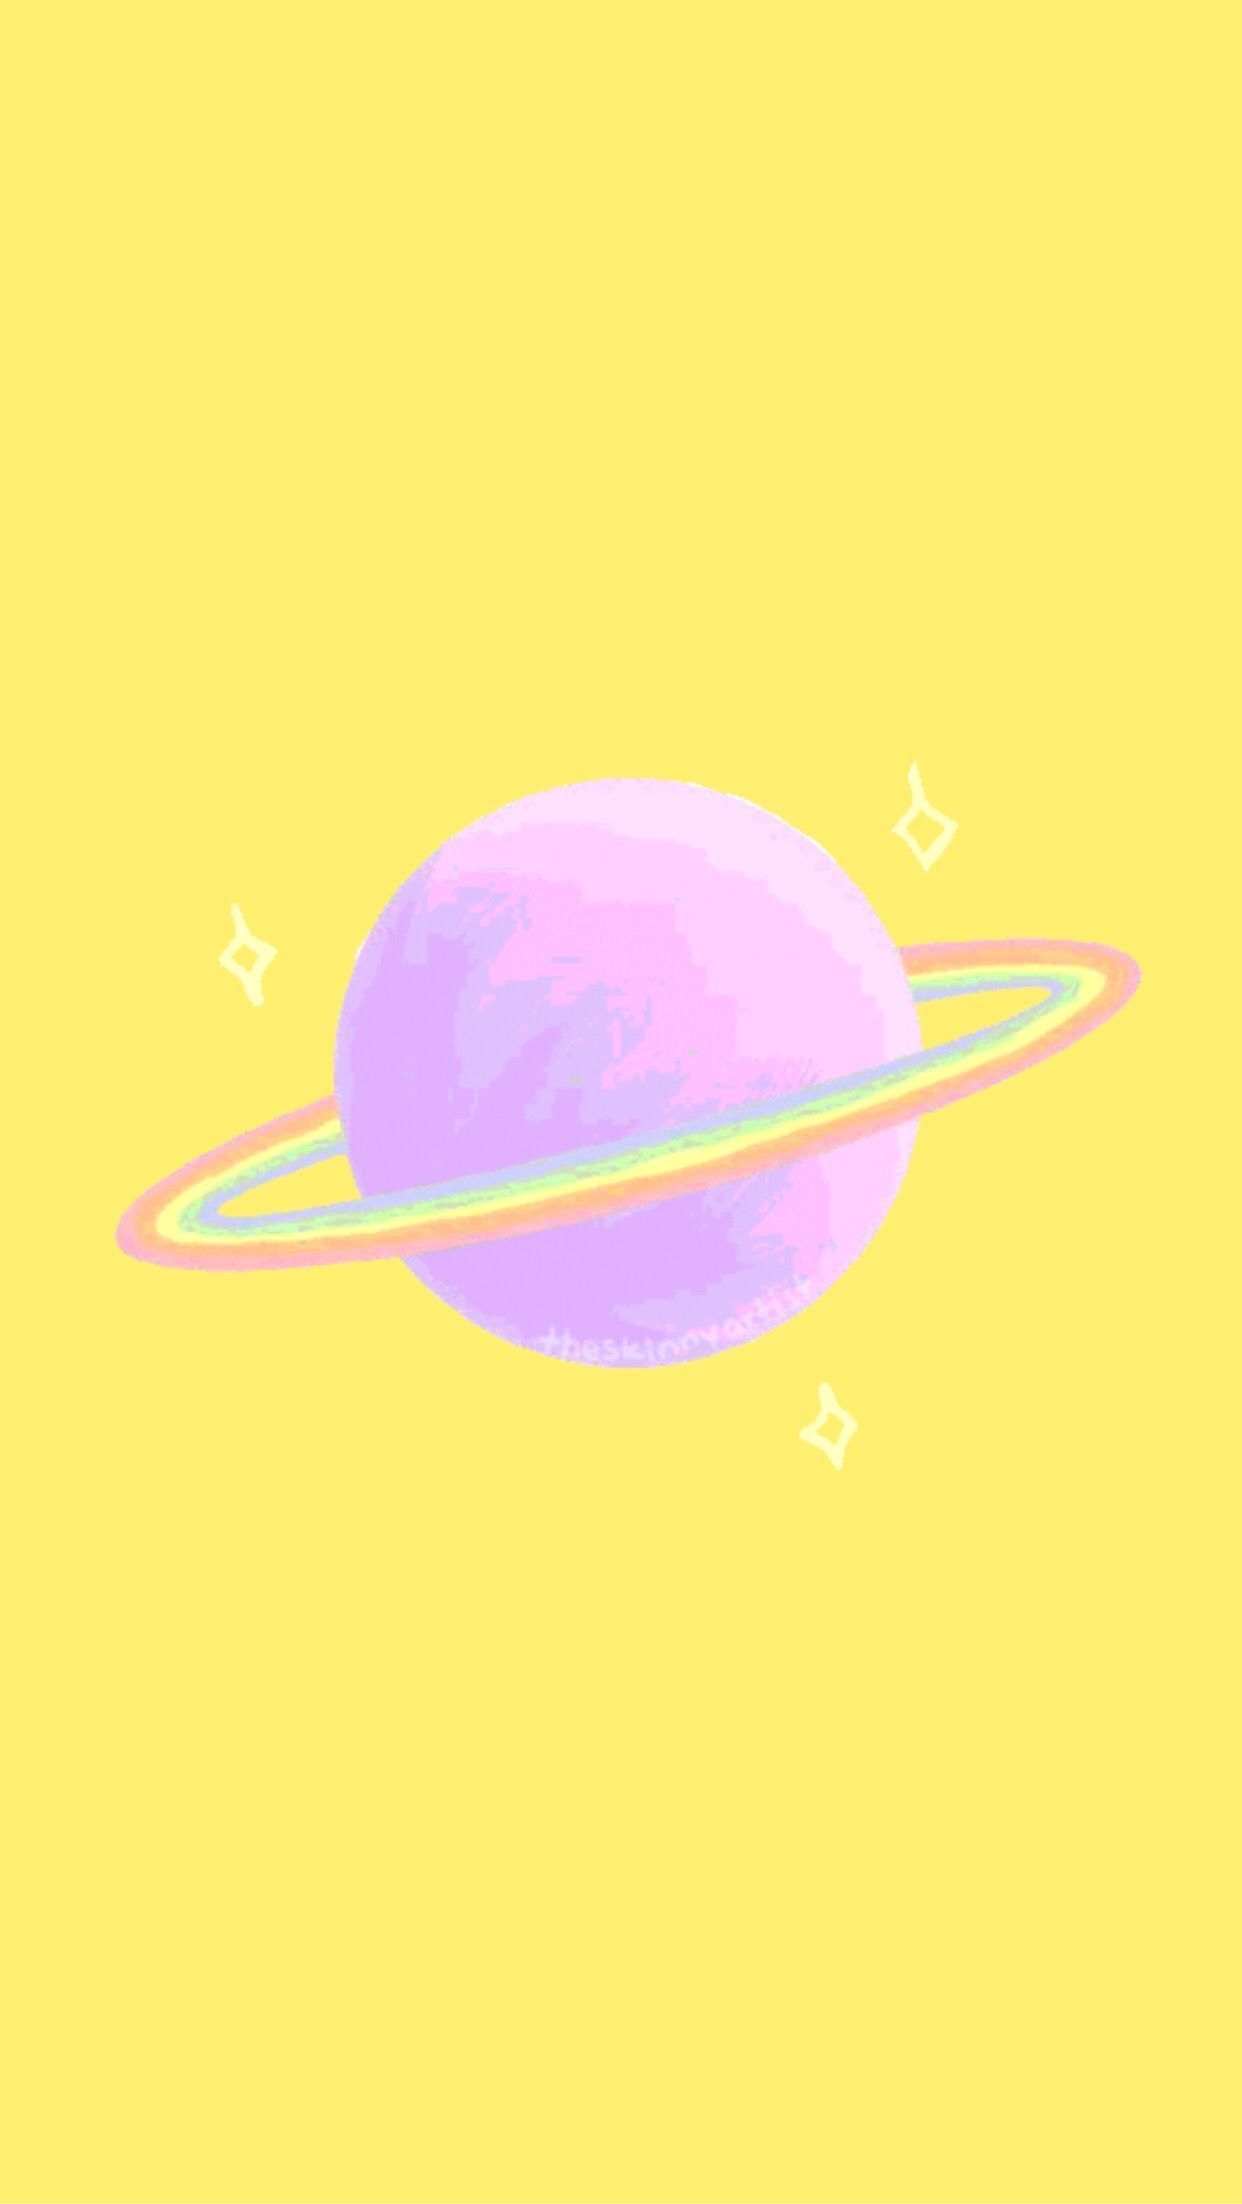 A purple planet with a rainbow ring around it - Yellow, light yellow